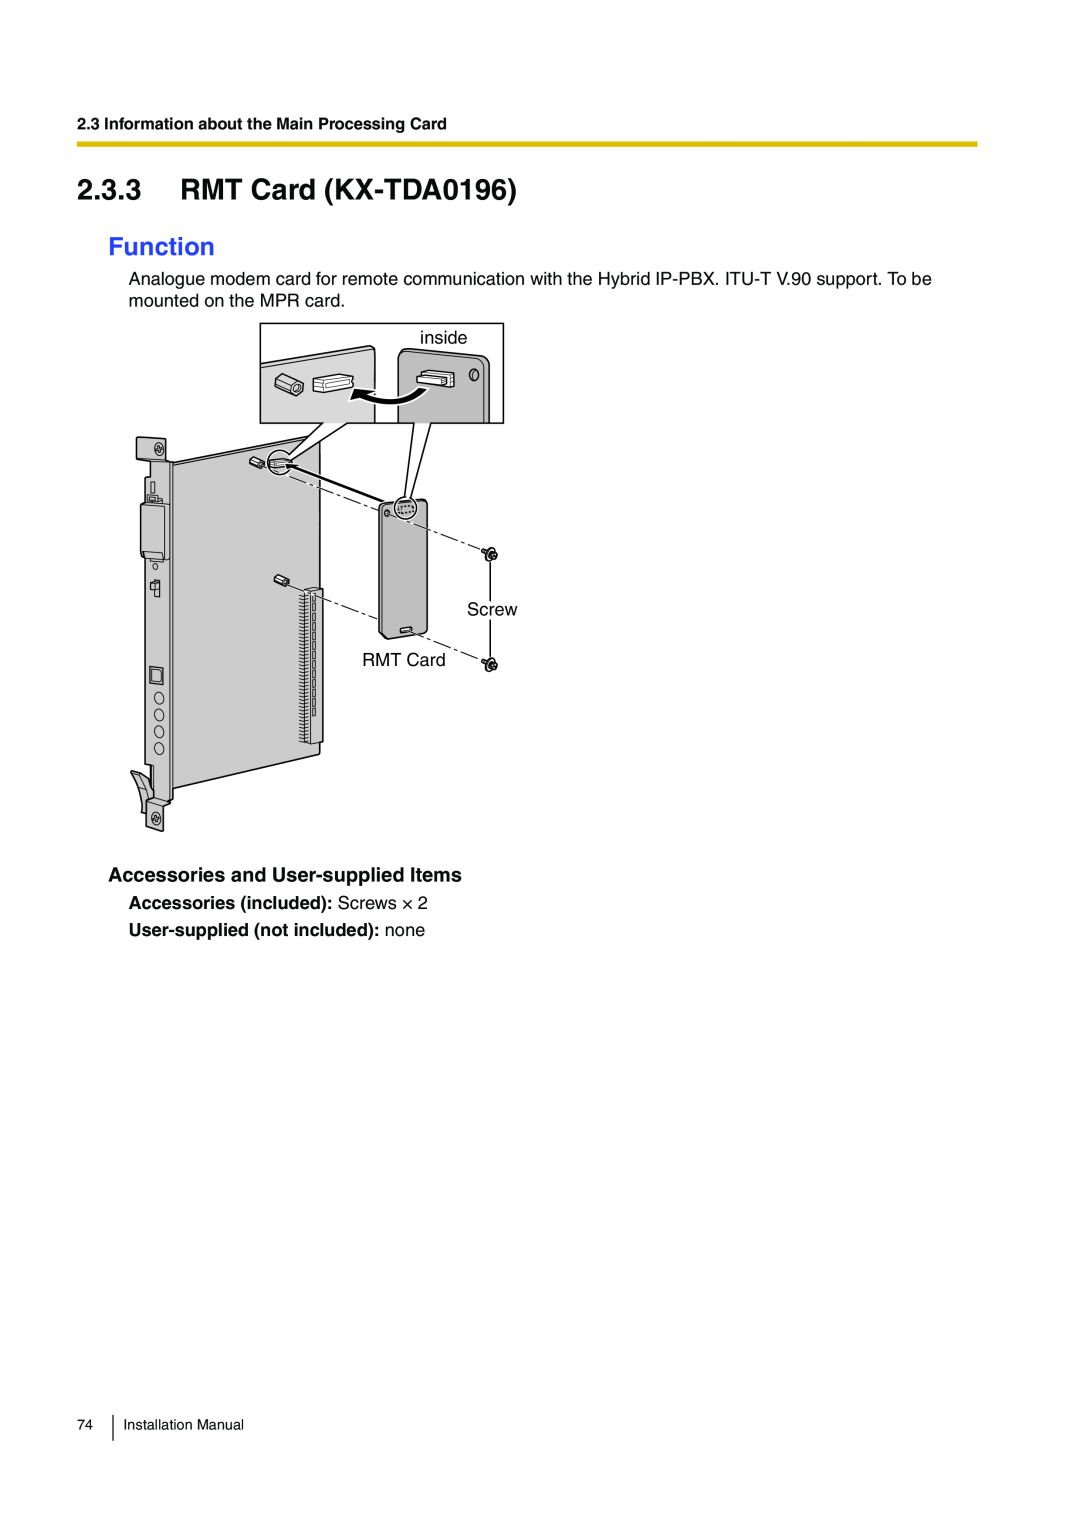 Panasonic KX-TDA100 installation manual RMT Card KX-TDA0196, Function, Accessories and User-supplied Items 